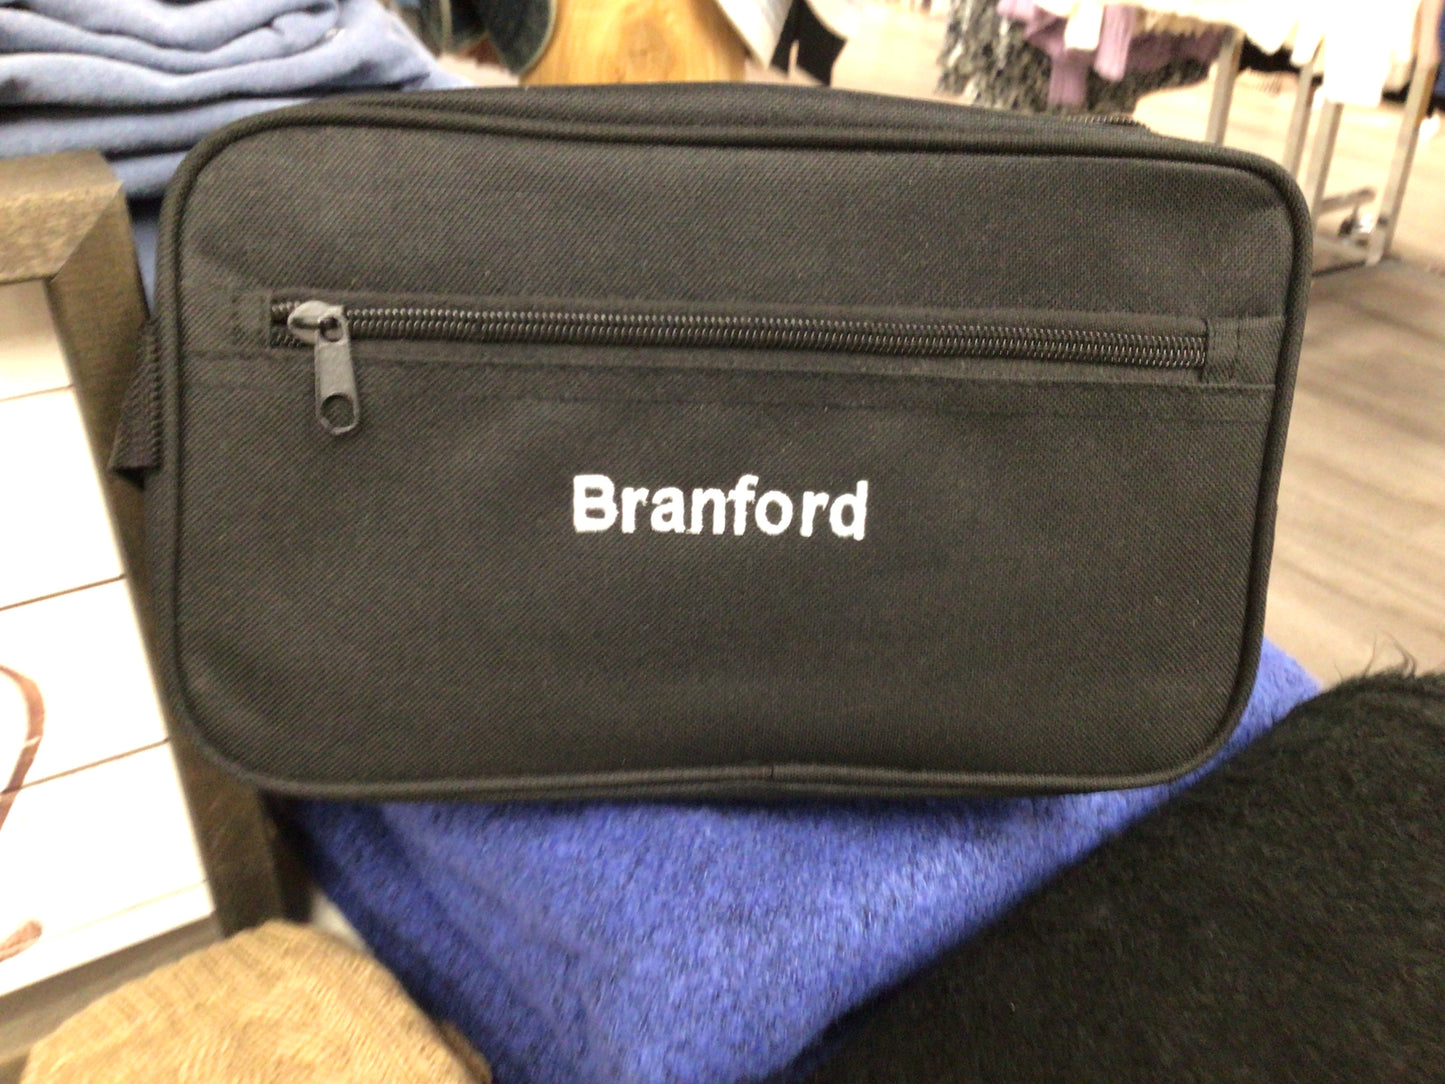 Branford CT canvas essentials bag in black. It is 10” wide and 4” deep.